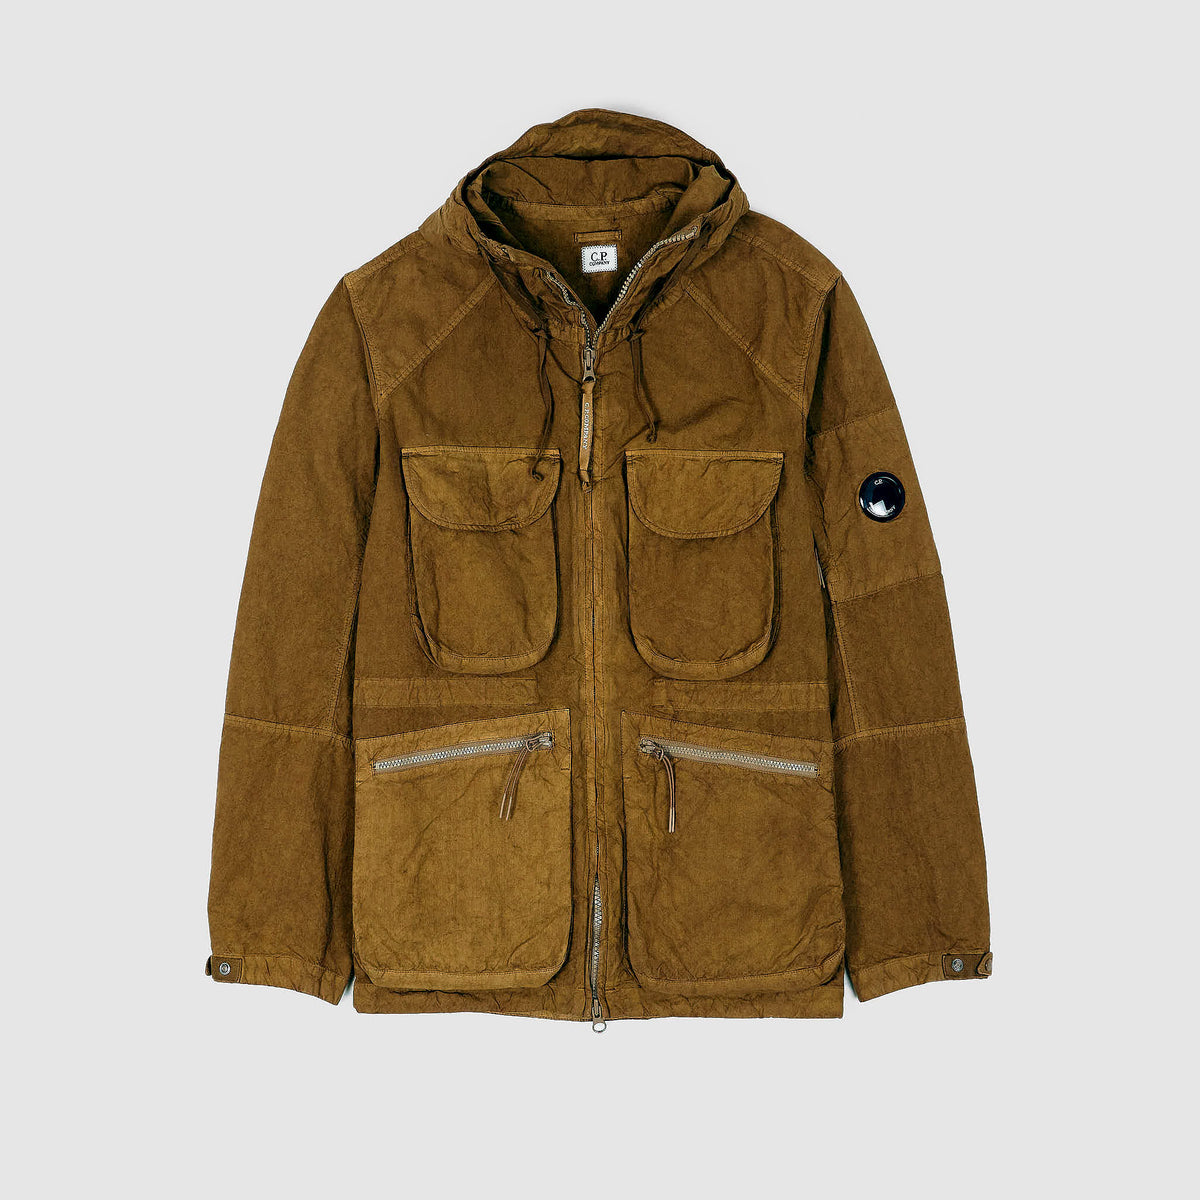 C.P. Company Hooded Short Field Parka with Removable Liner